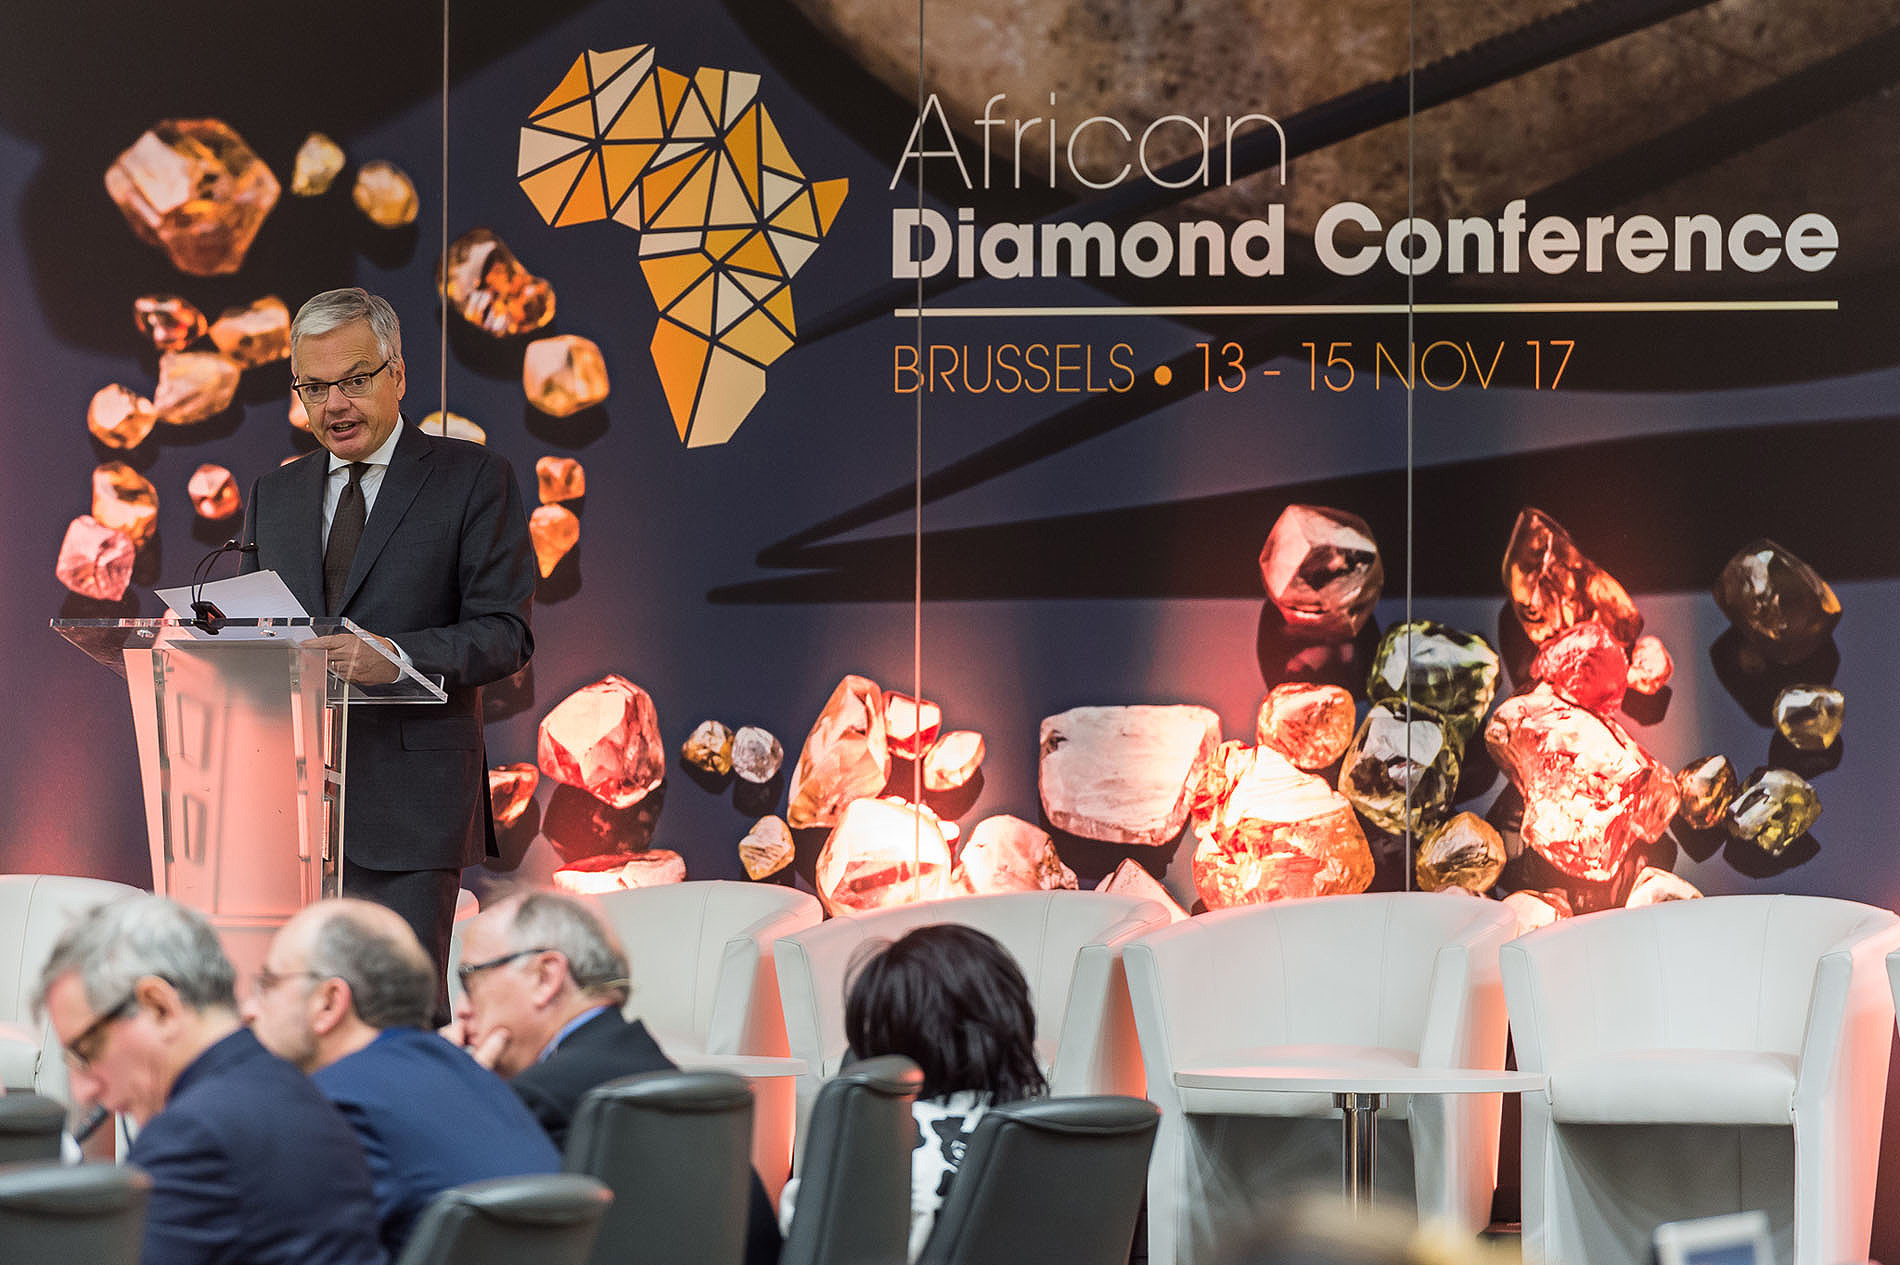 The 2017 African Diamond Conference organised by the Antwerp Diamond World Centre [ADWC].